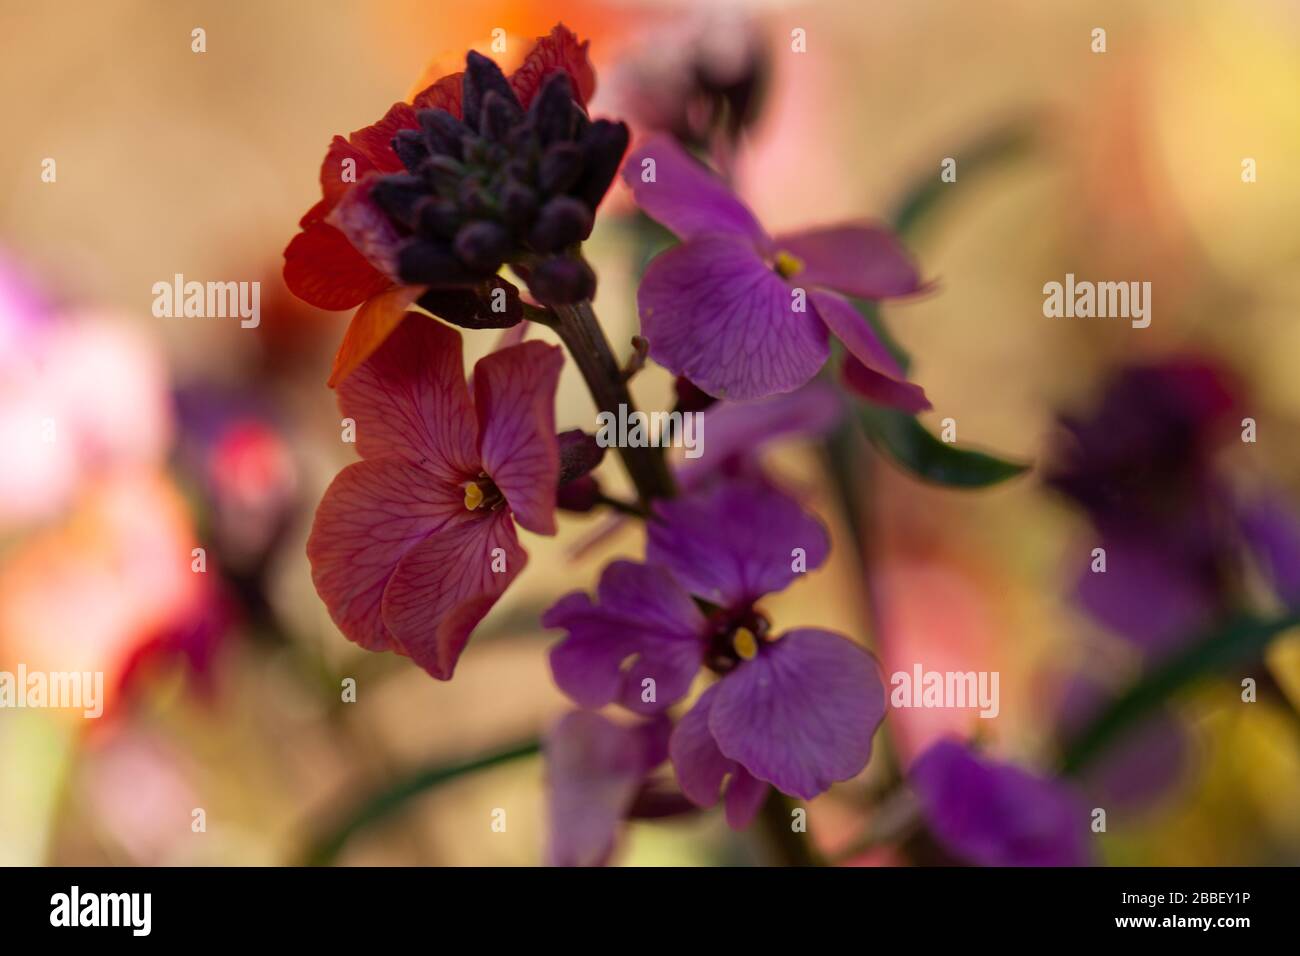 The cottage garden in spring - close-up of lilac pink flowerheads of Erysimum ‘Bowles’ Mauve variety wallflowers with background blur. Stock Photo